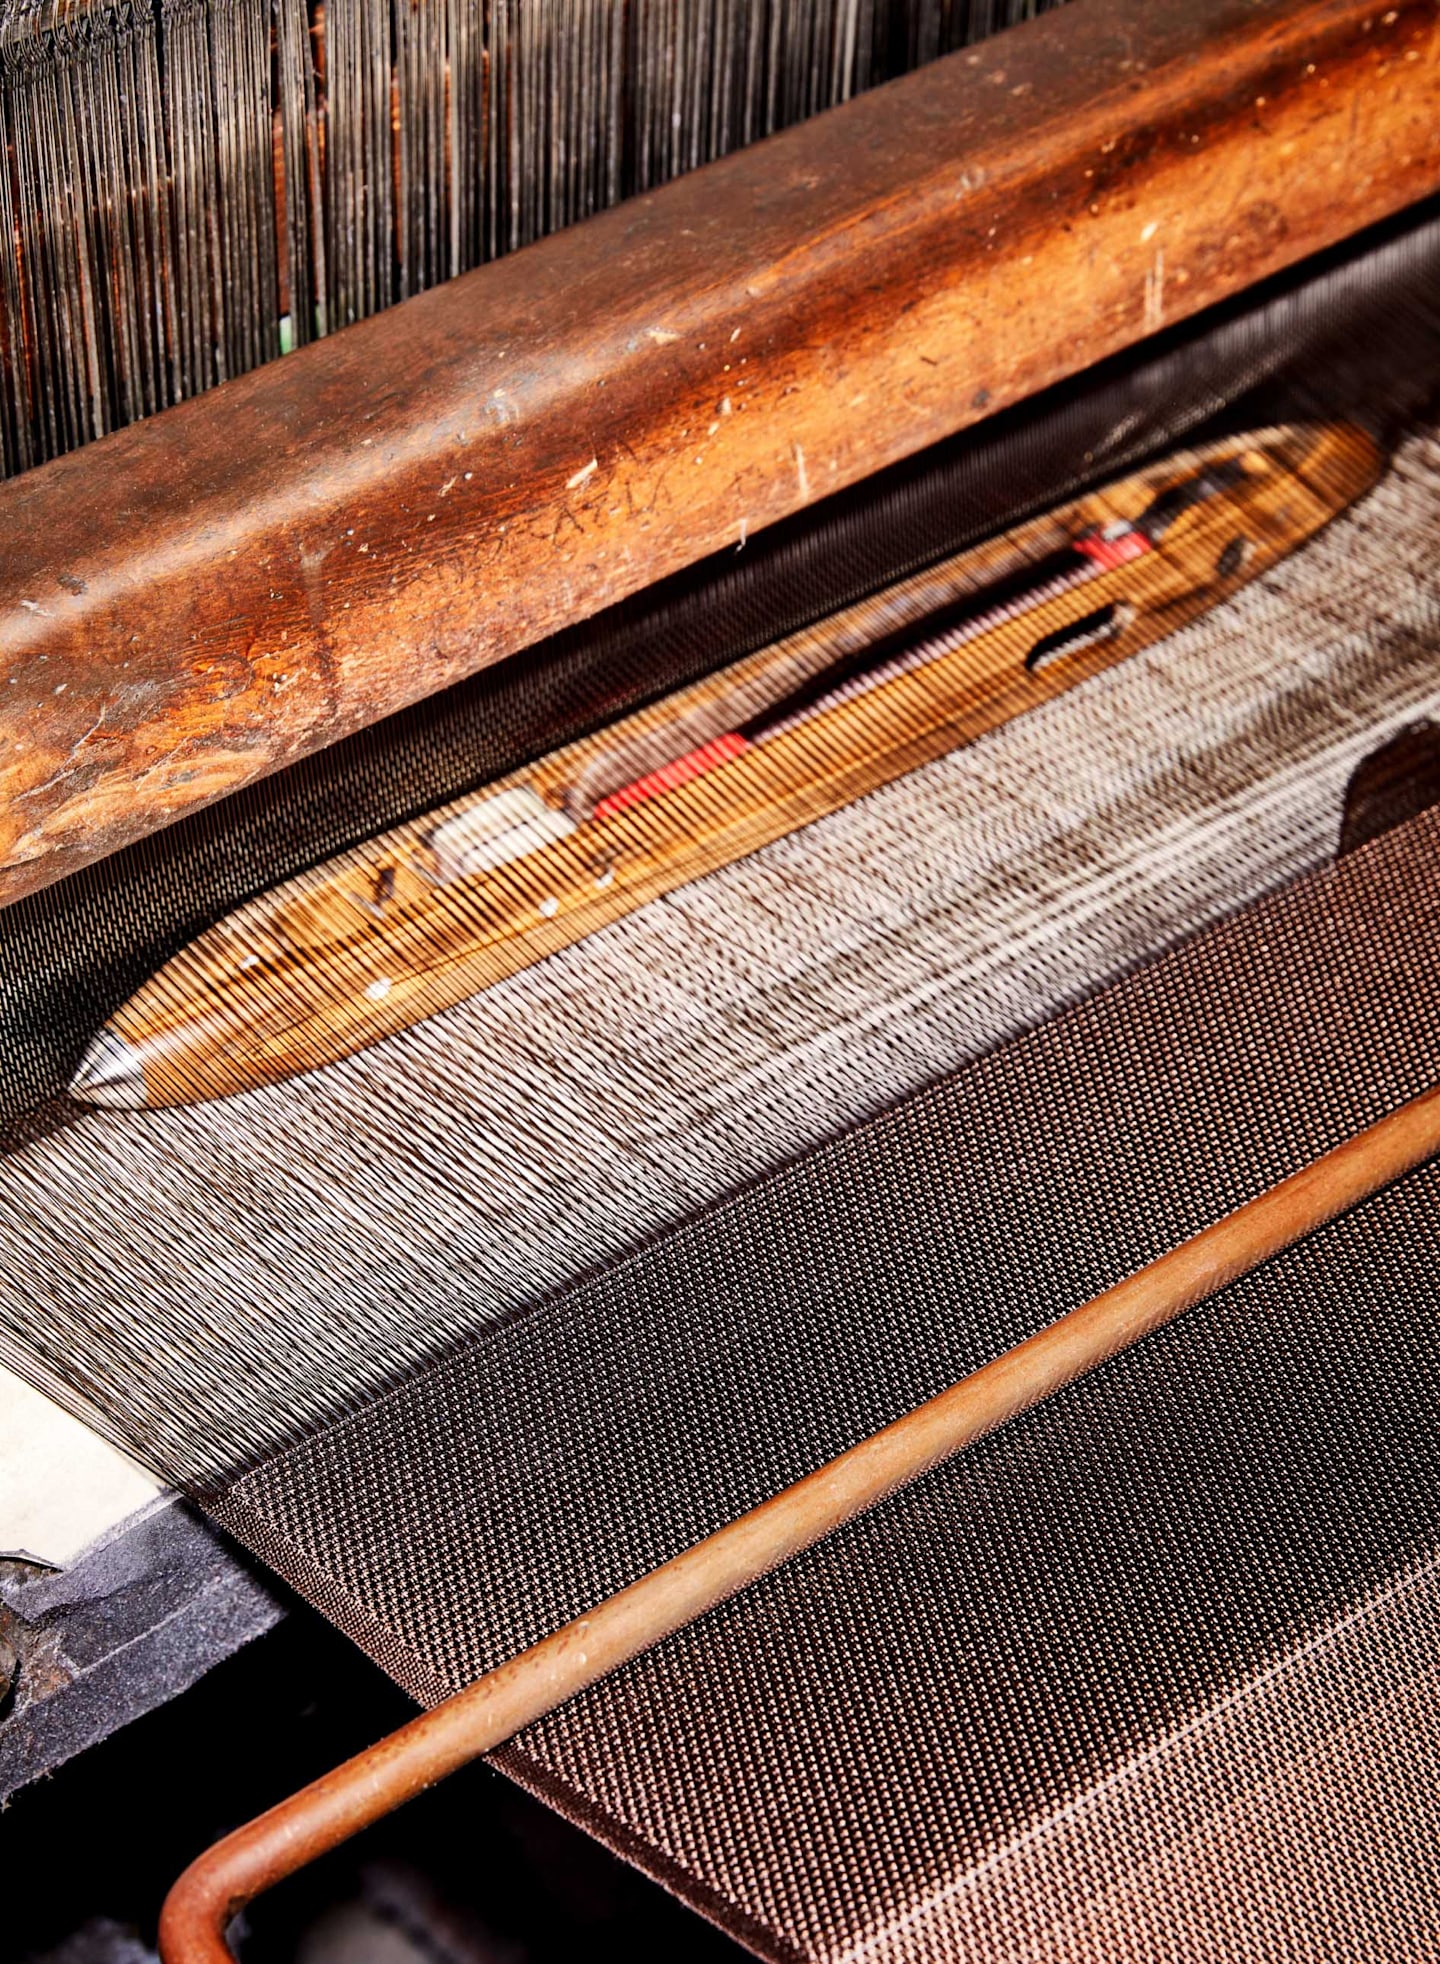 One of the oldest silk loom machines in the world at Fossati Mill in Italy- producing fabric for grenadine ties.